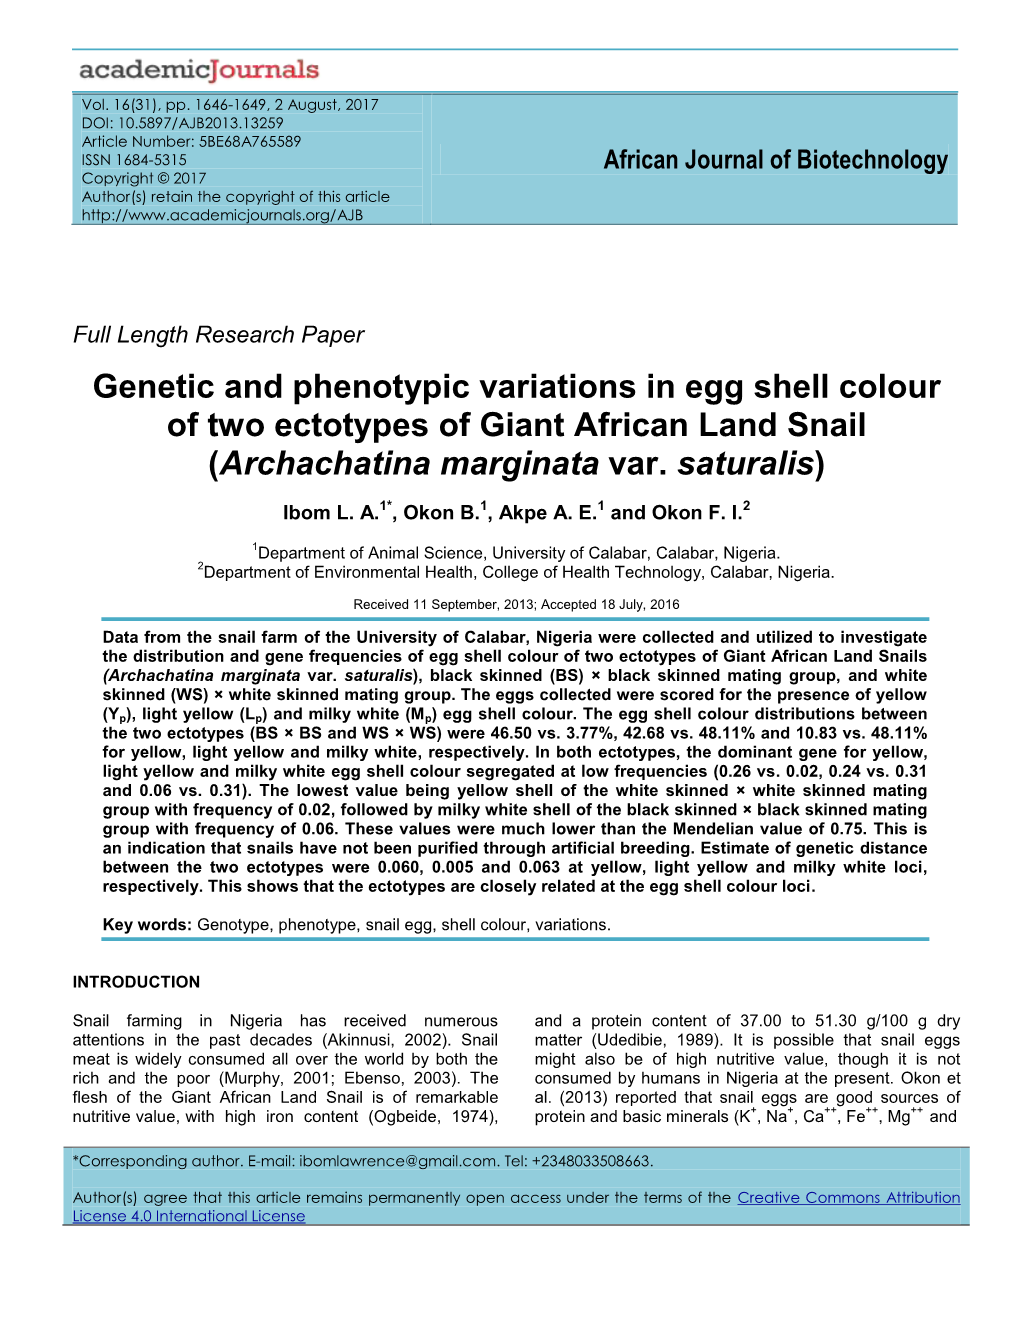 Genetic and Phenotypic Variations in Egg Shell Colour of Two Ectotypes of Giant African Land Snail (Archachatina Marginata Var